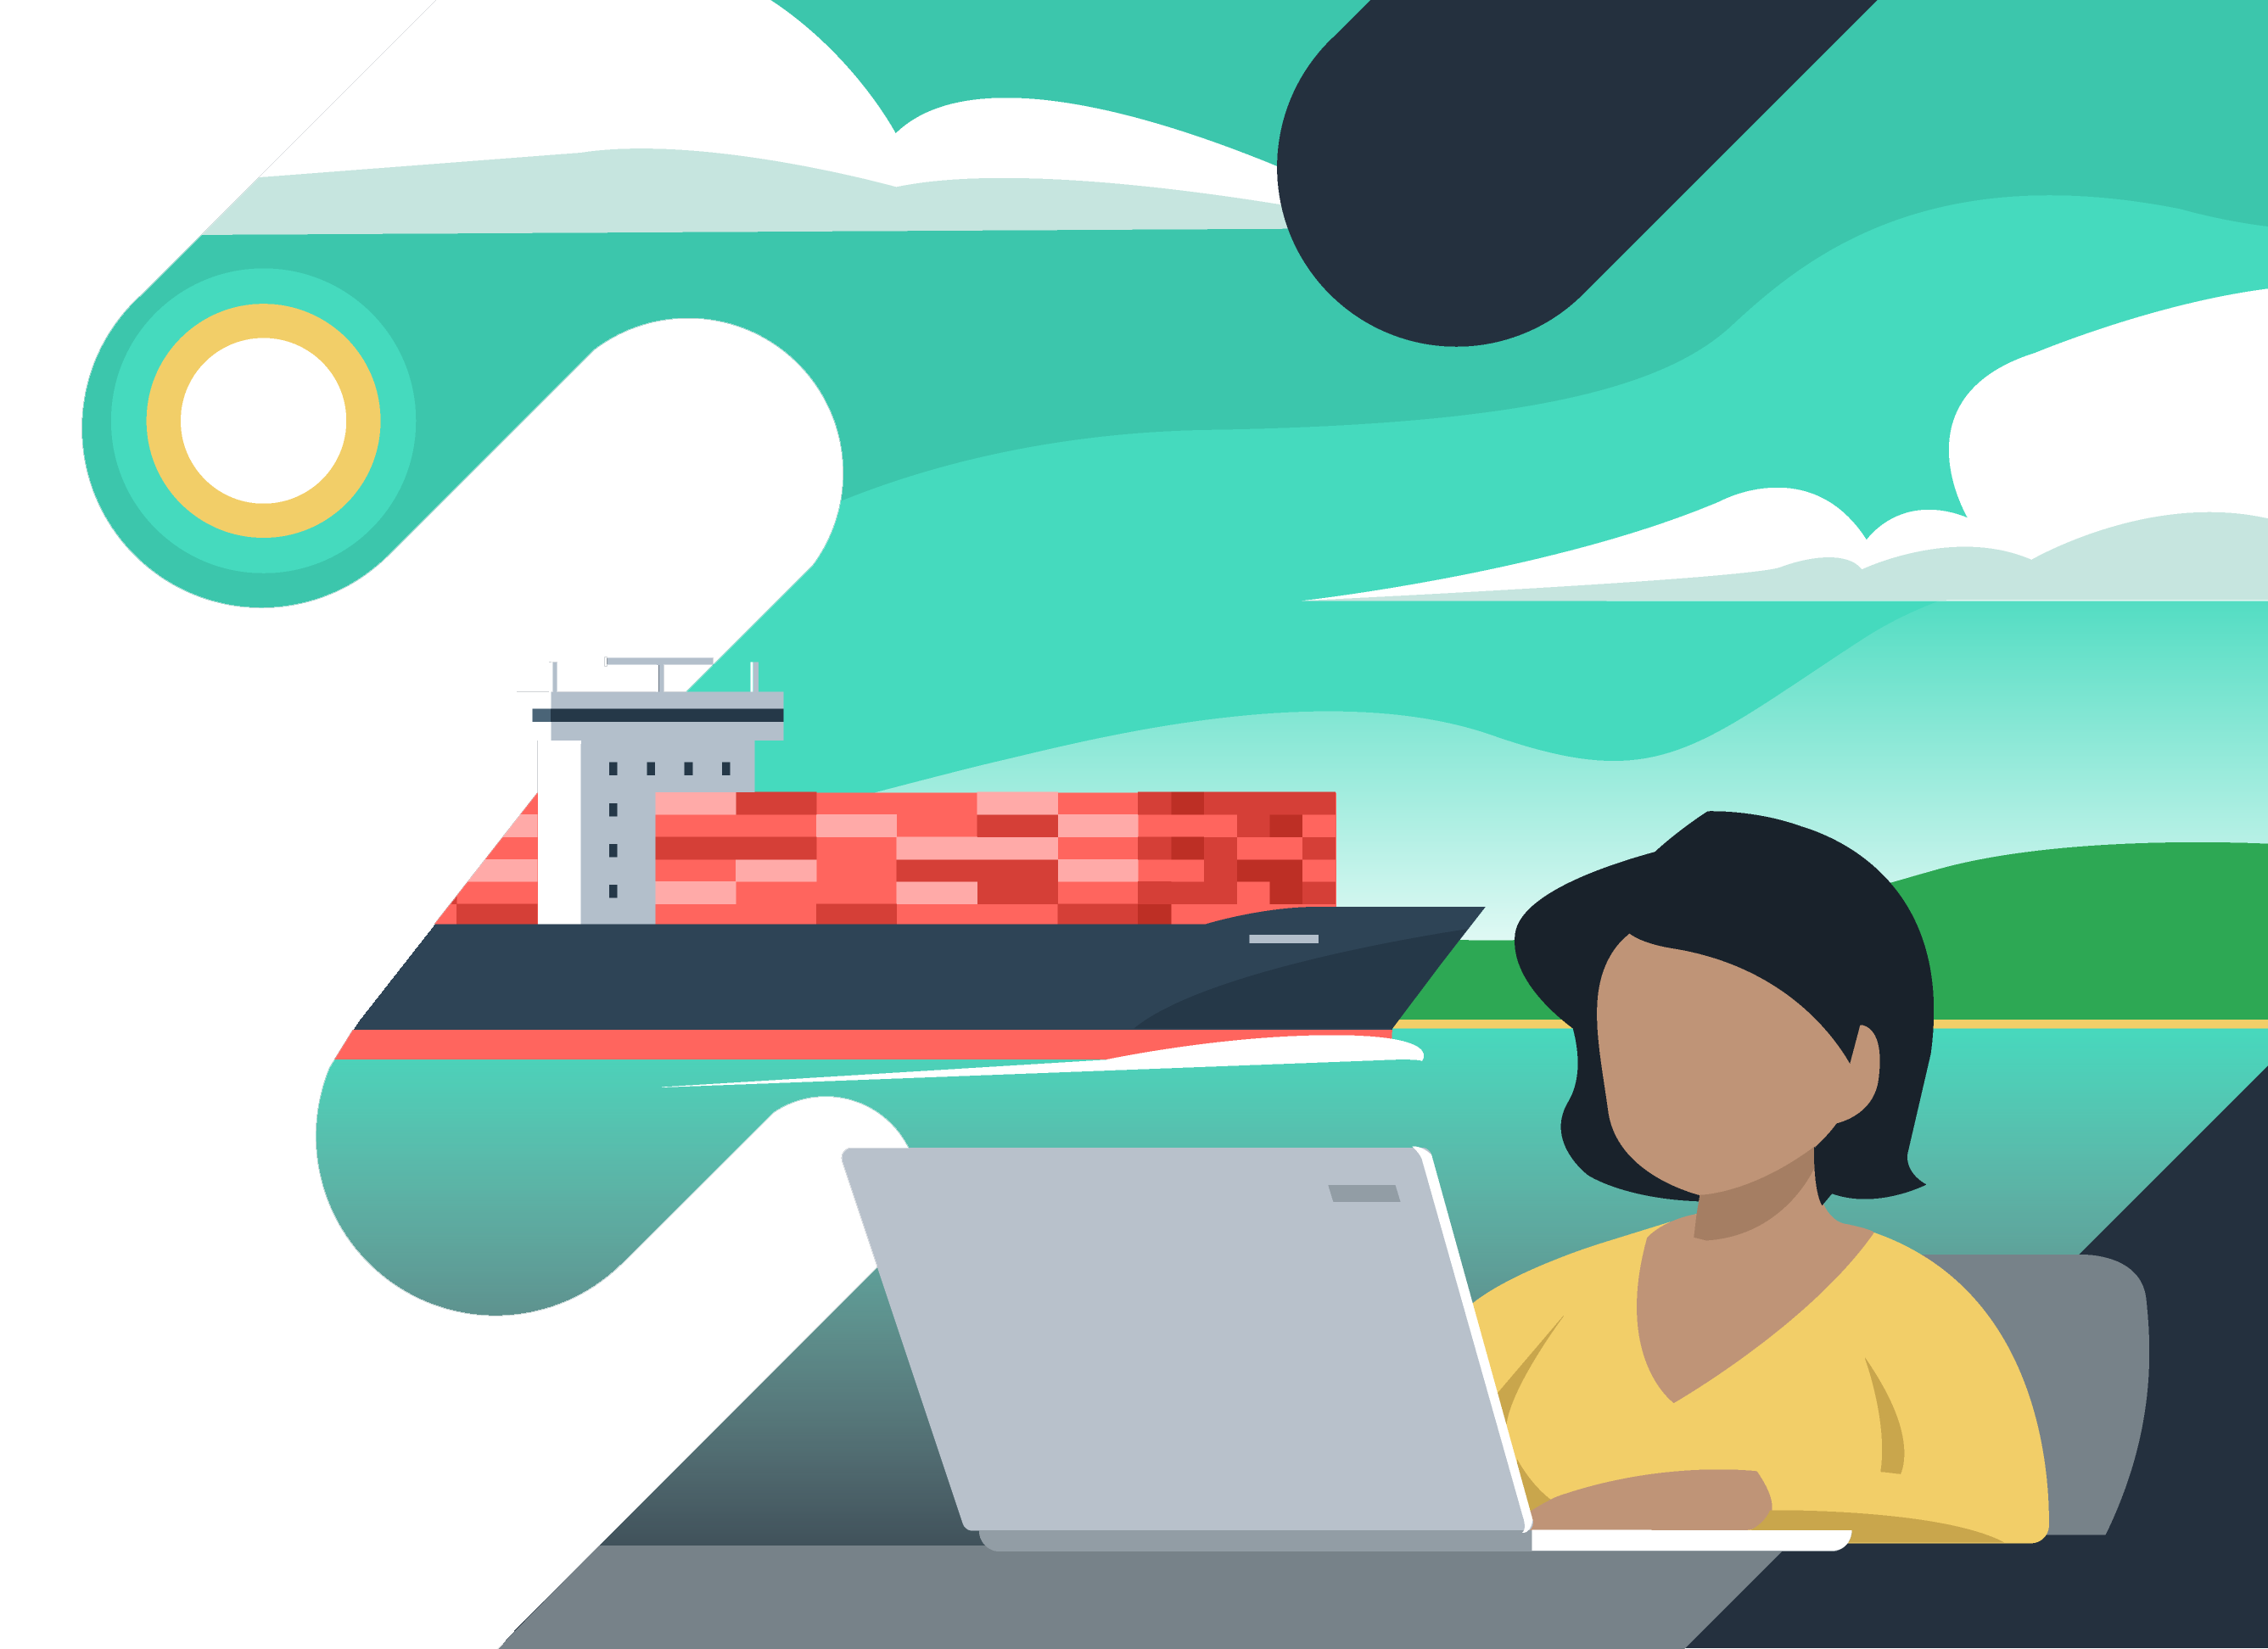 Illustration of a person focused on their mission with a shipping vessel in the background